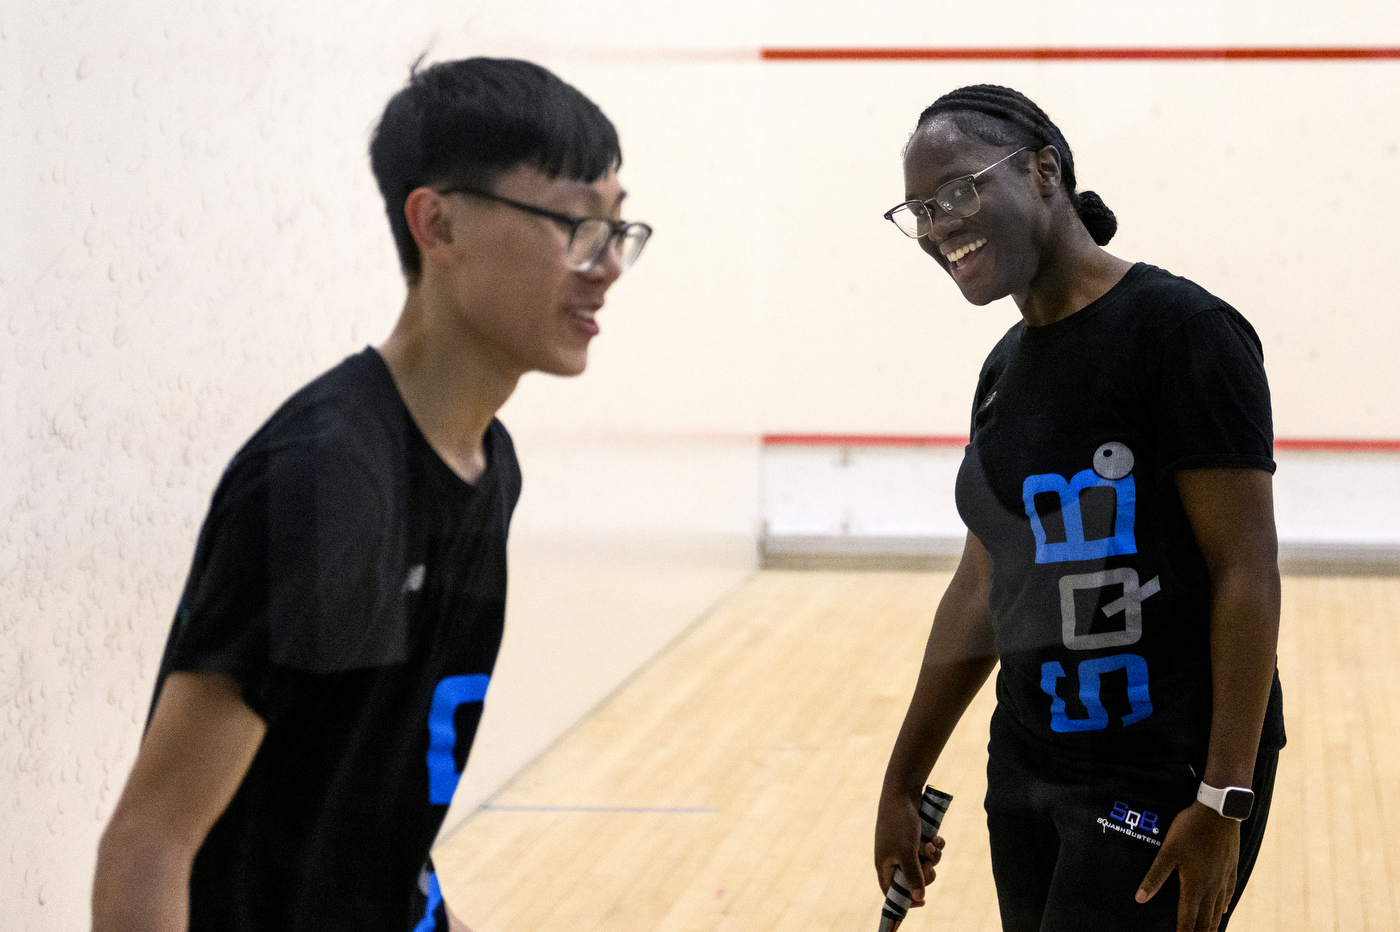 two young people wearing SquashBusters shirts inside a squash court